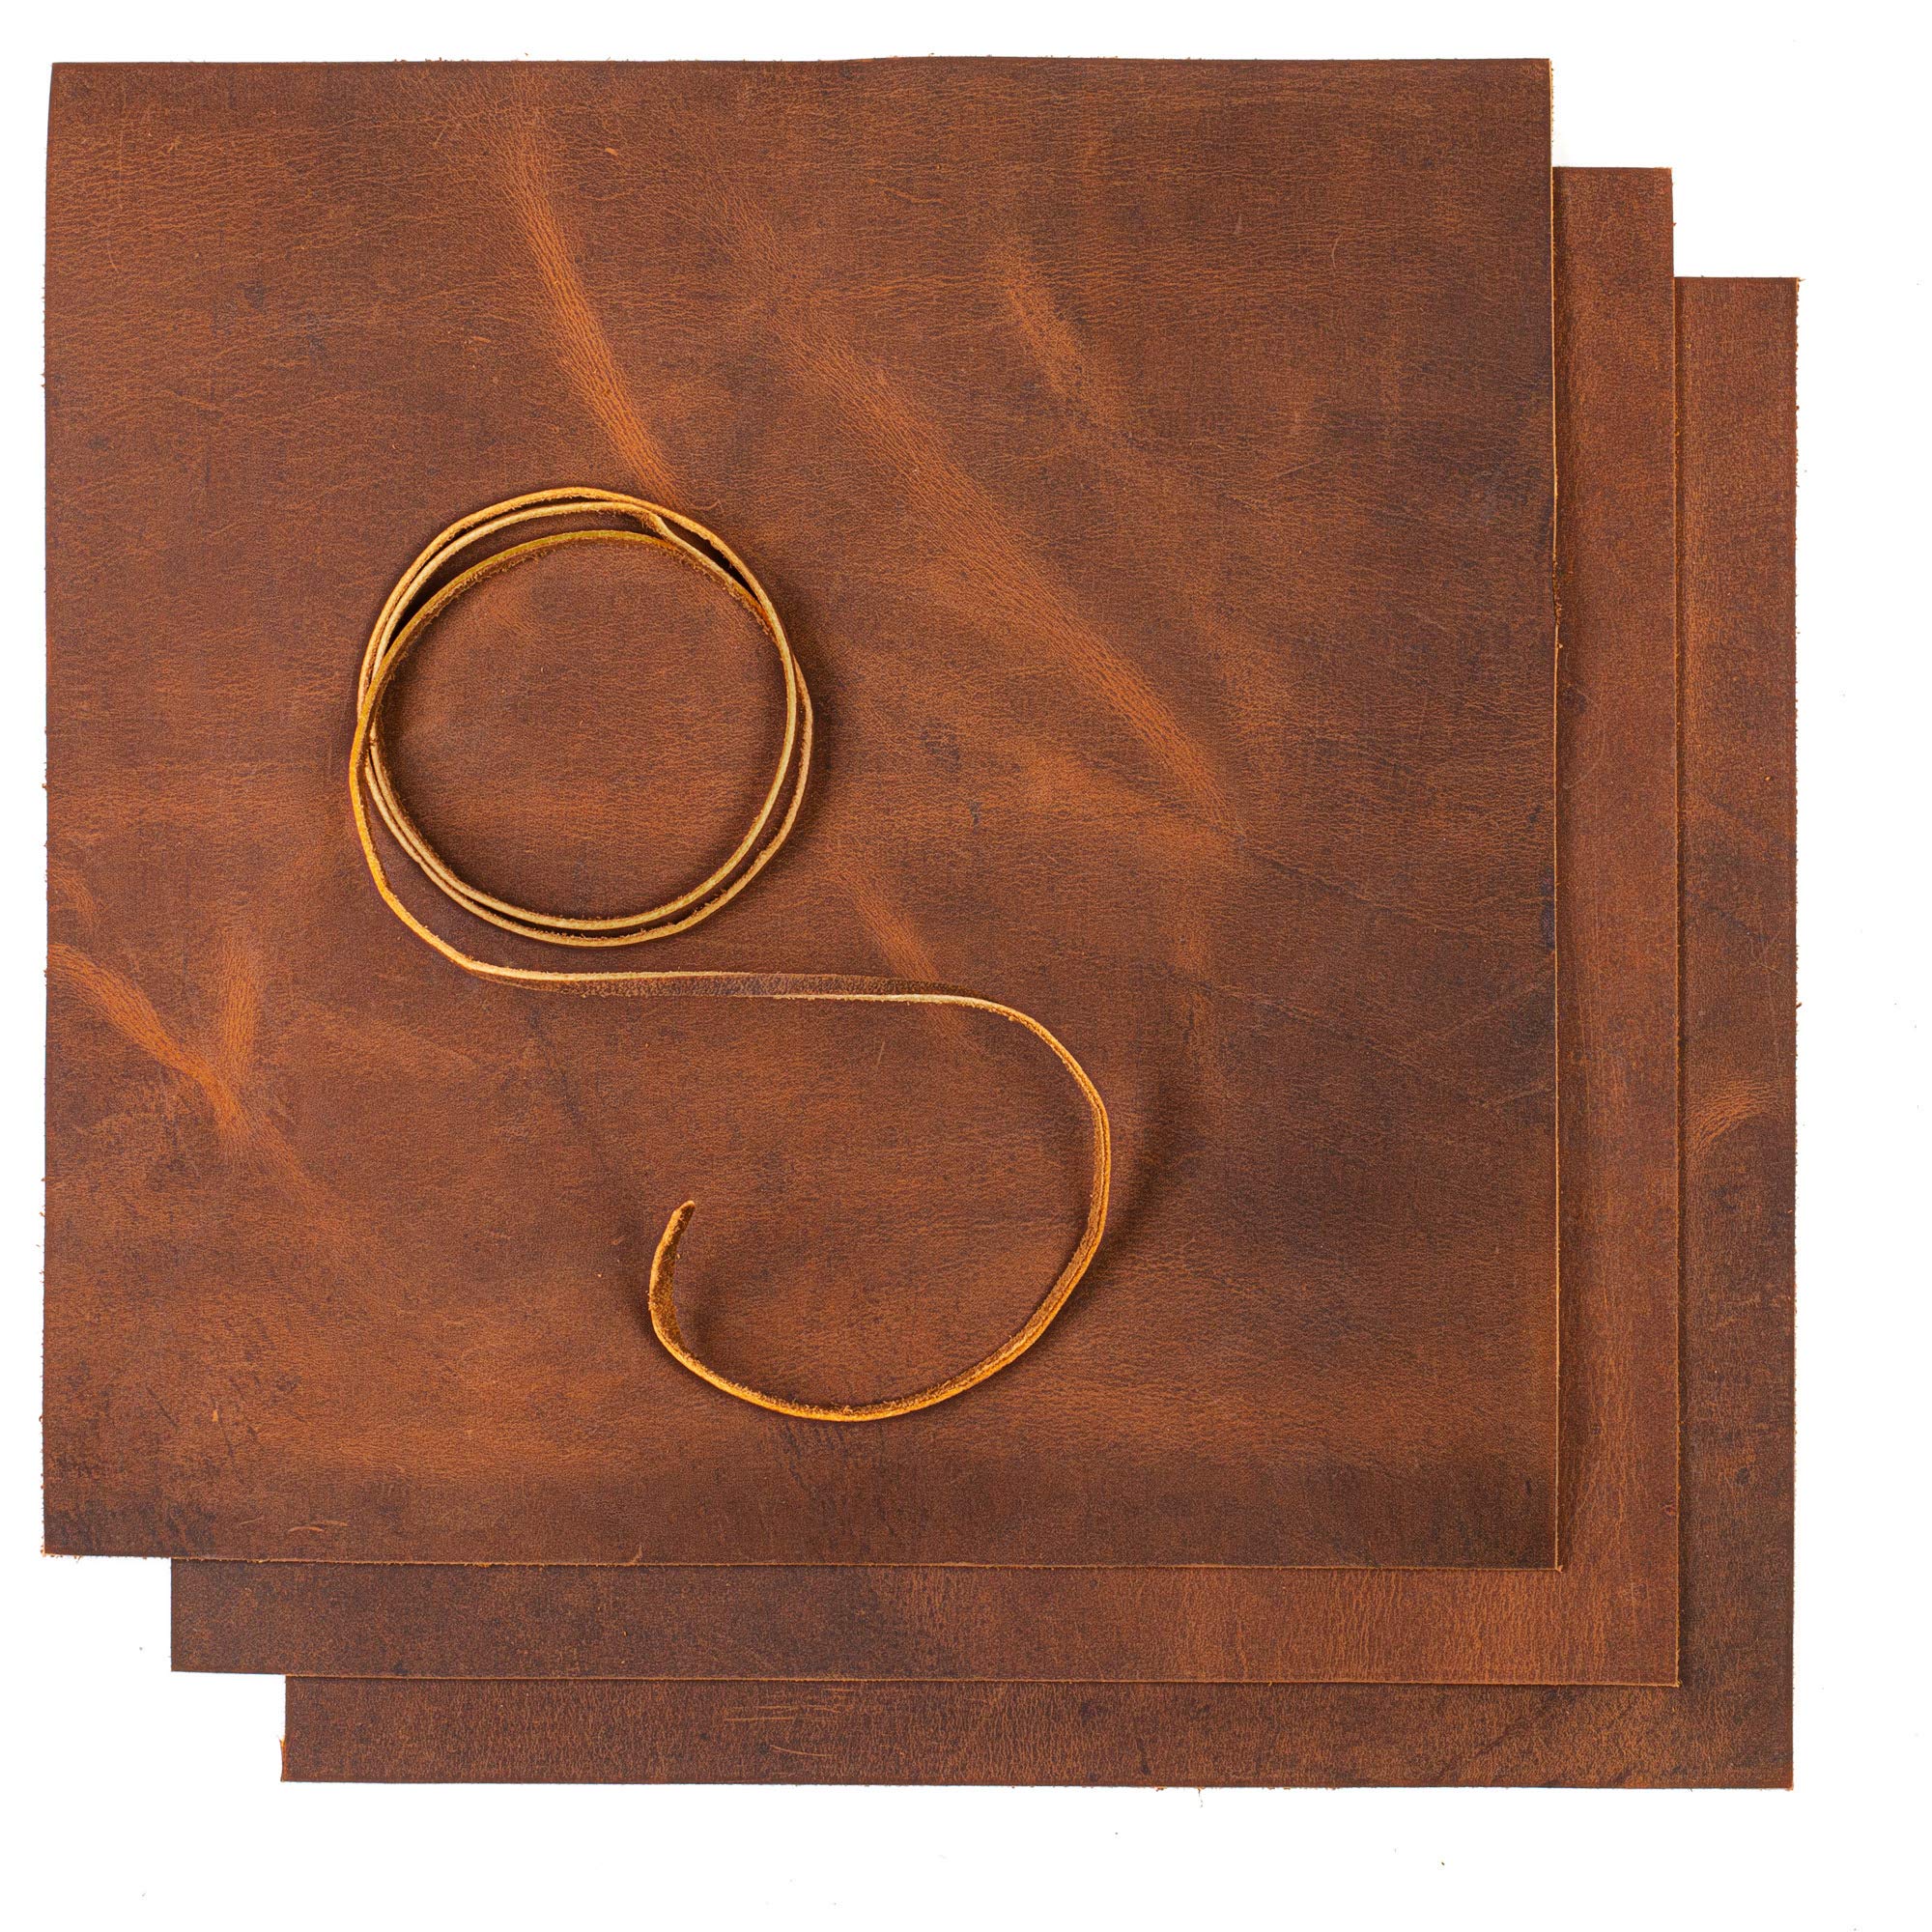 Leather Sheets for Leather Crafts - Full Grain Buffalo Leather Squares -  Great for Jewelry, Leather Wallets, Cricut, Leatherworking Arts and Crafts  Includes 3 Sheets (12x12)+ Leather Cord (36) Brown Squares